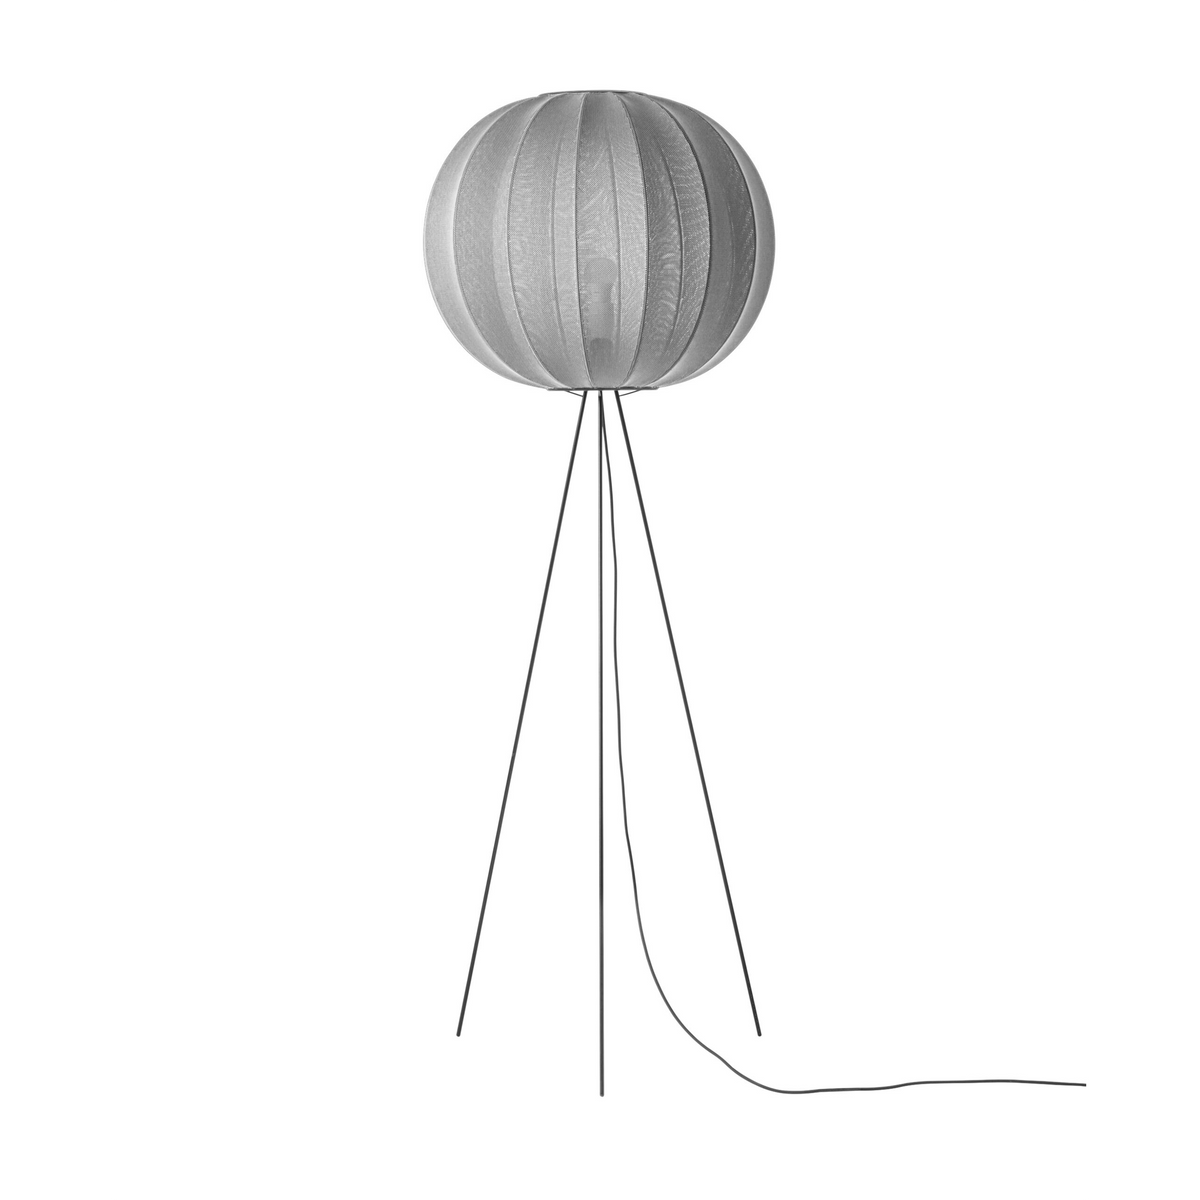 Made by Hand, Knit-Wit High Floor Lamp 60, Sandstone, Floor,